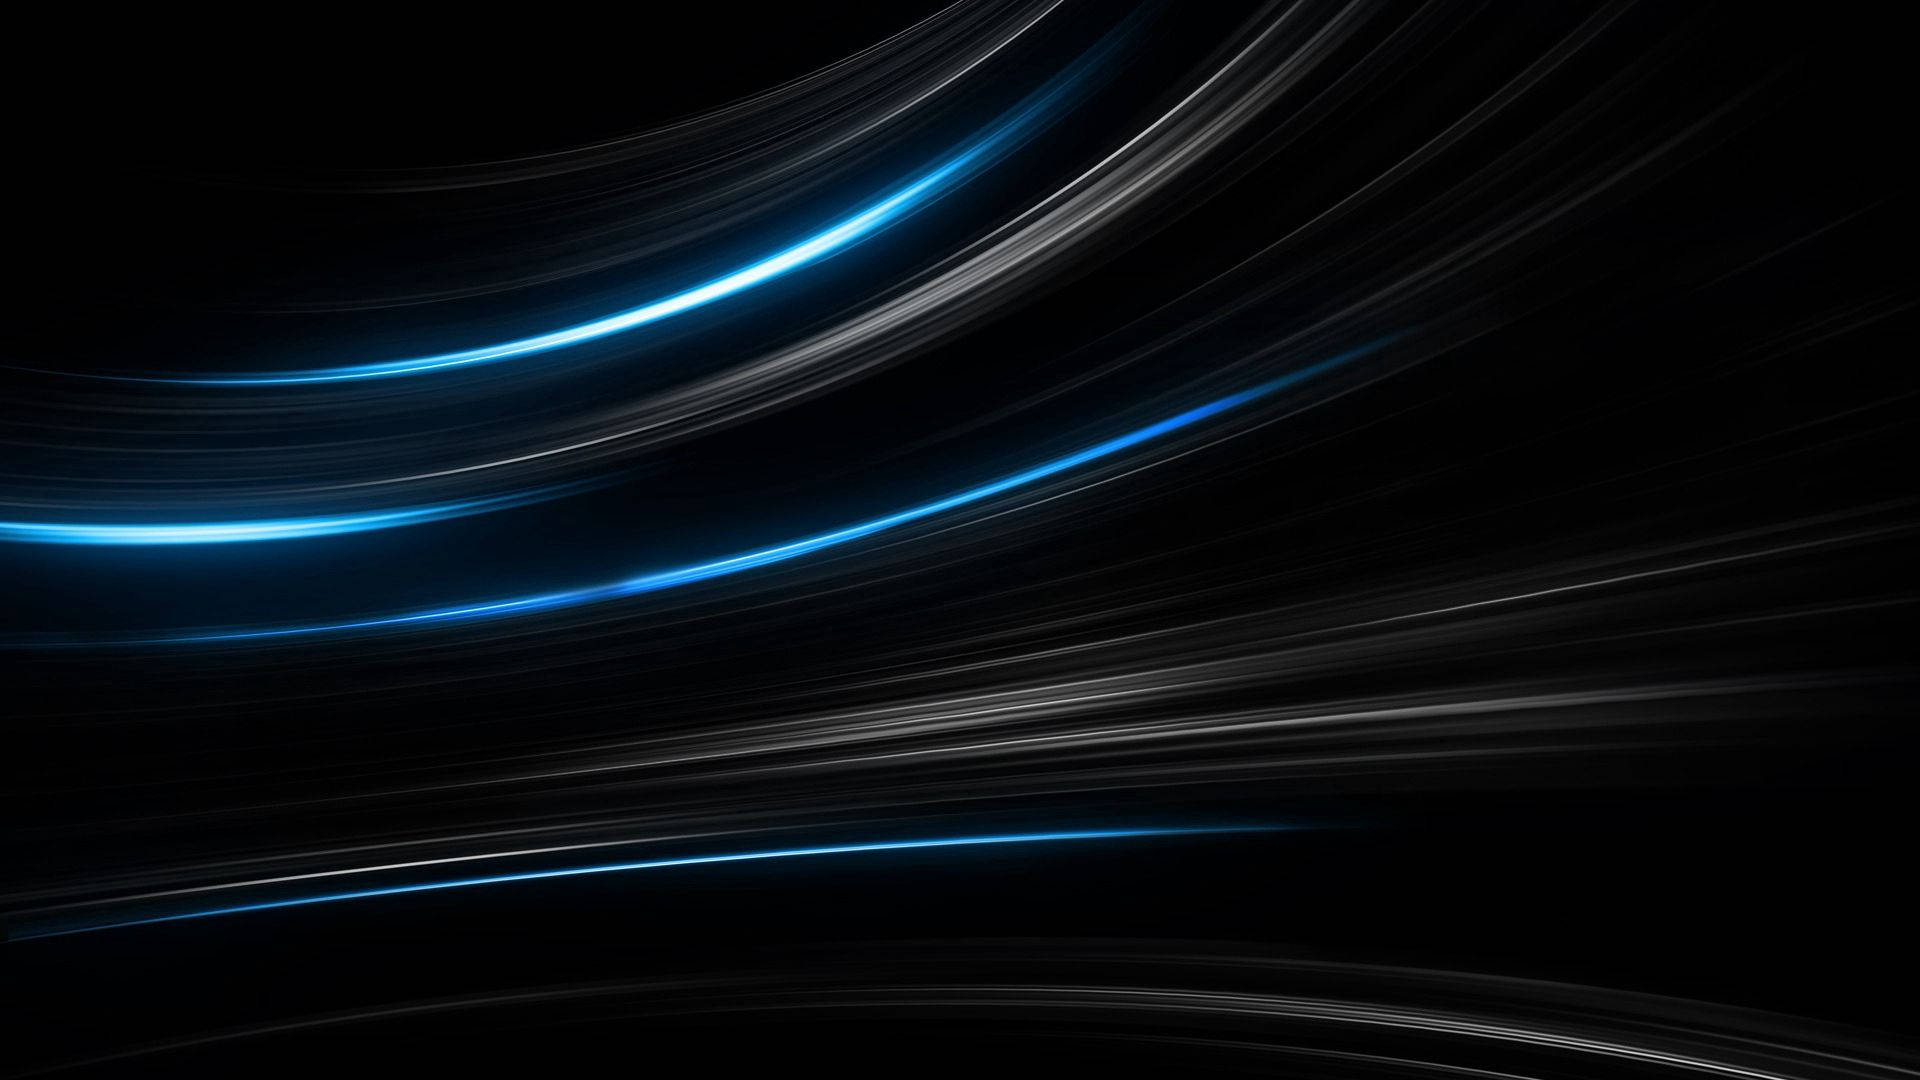 Abstract Artwork Of A Black And Blue Mix Background